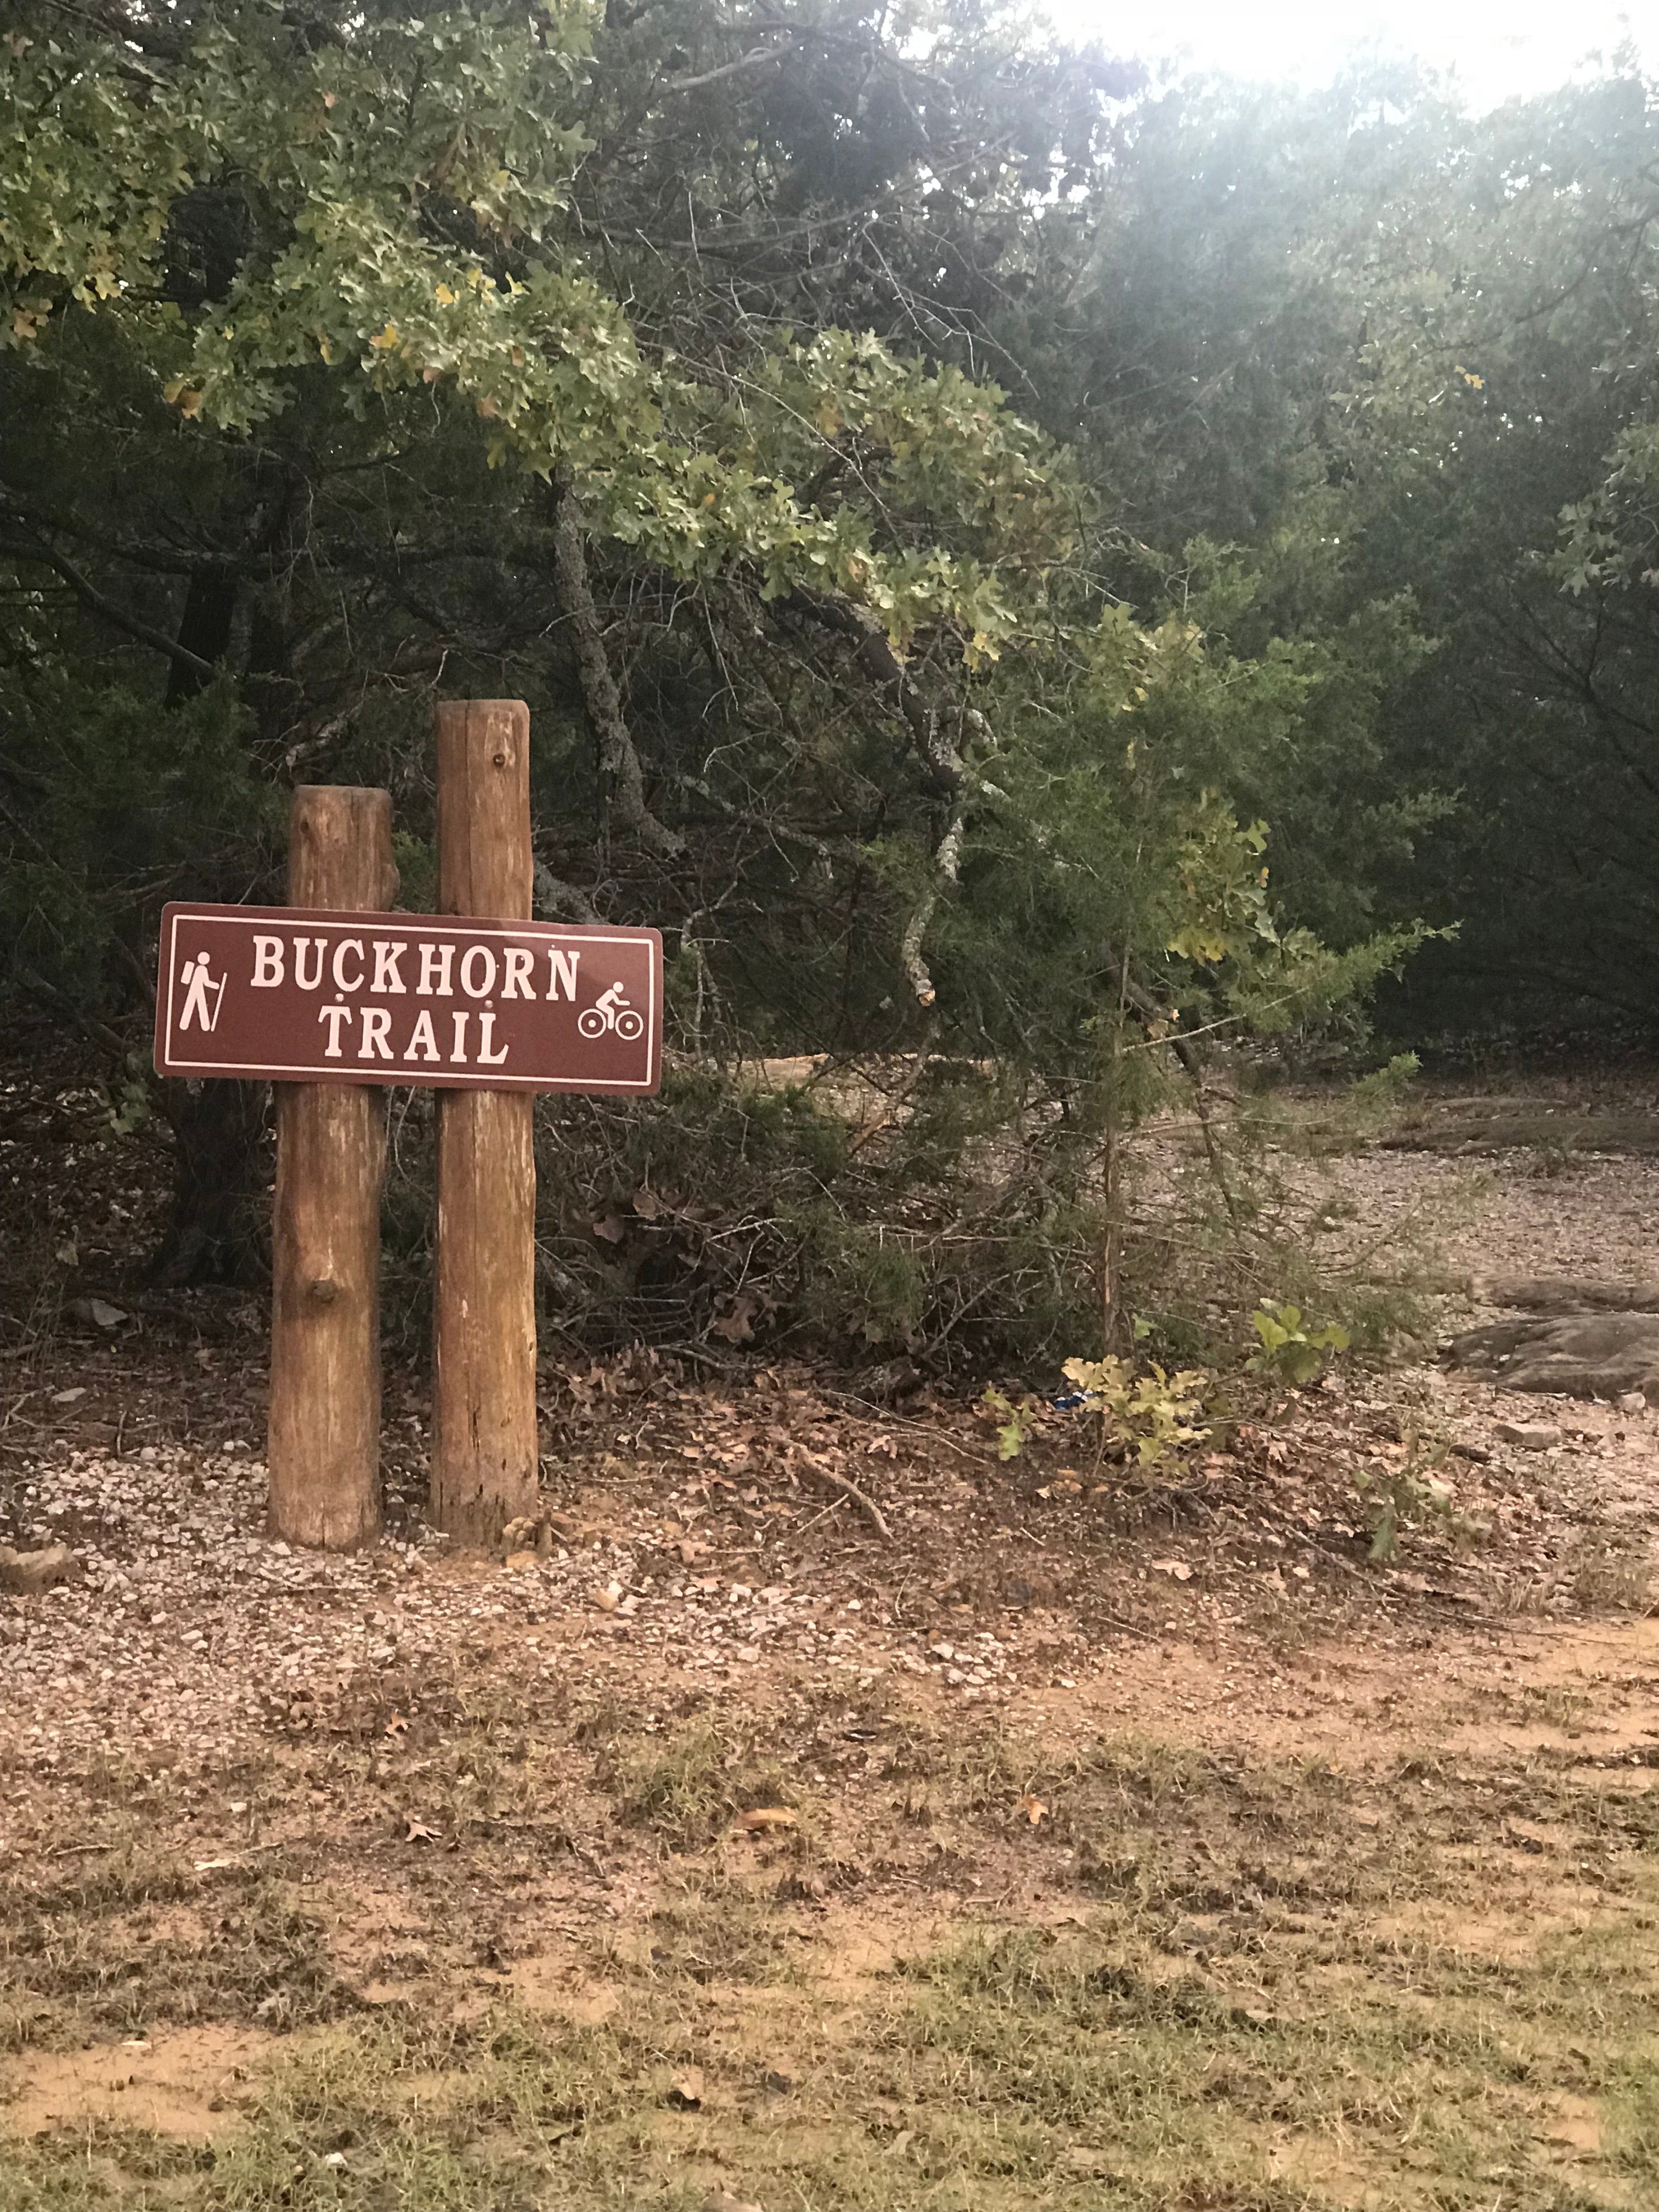 There is one hiking trail at this campsite as you pull in on the main driveway